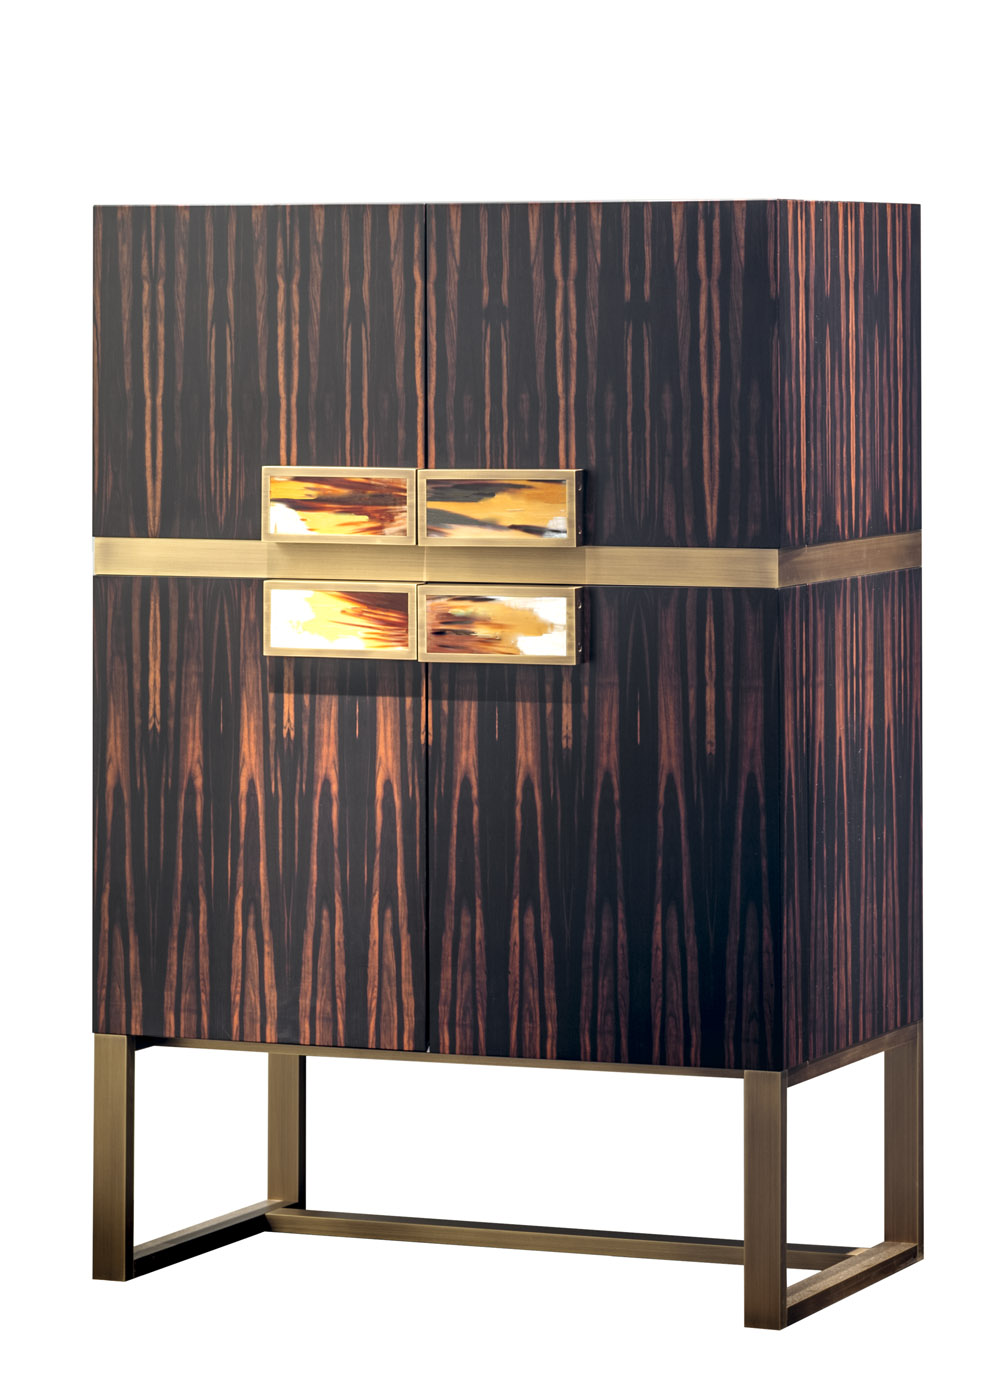 Cabinets and bookcases - Cosmopolitan bar cabinet in horn and Makassar ebony veneer and burnished brass - vertical - Arcahorn